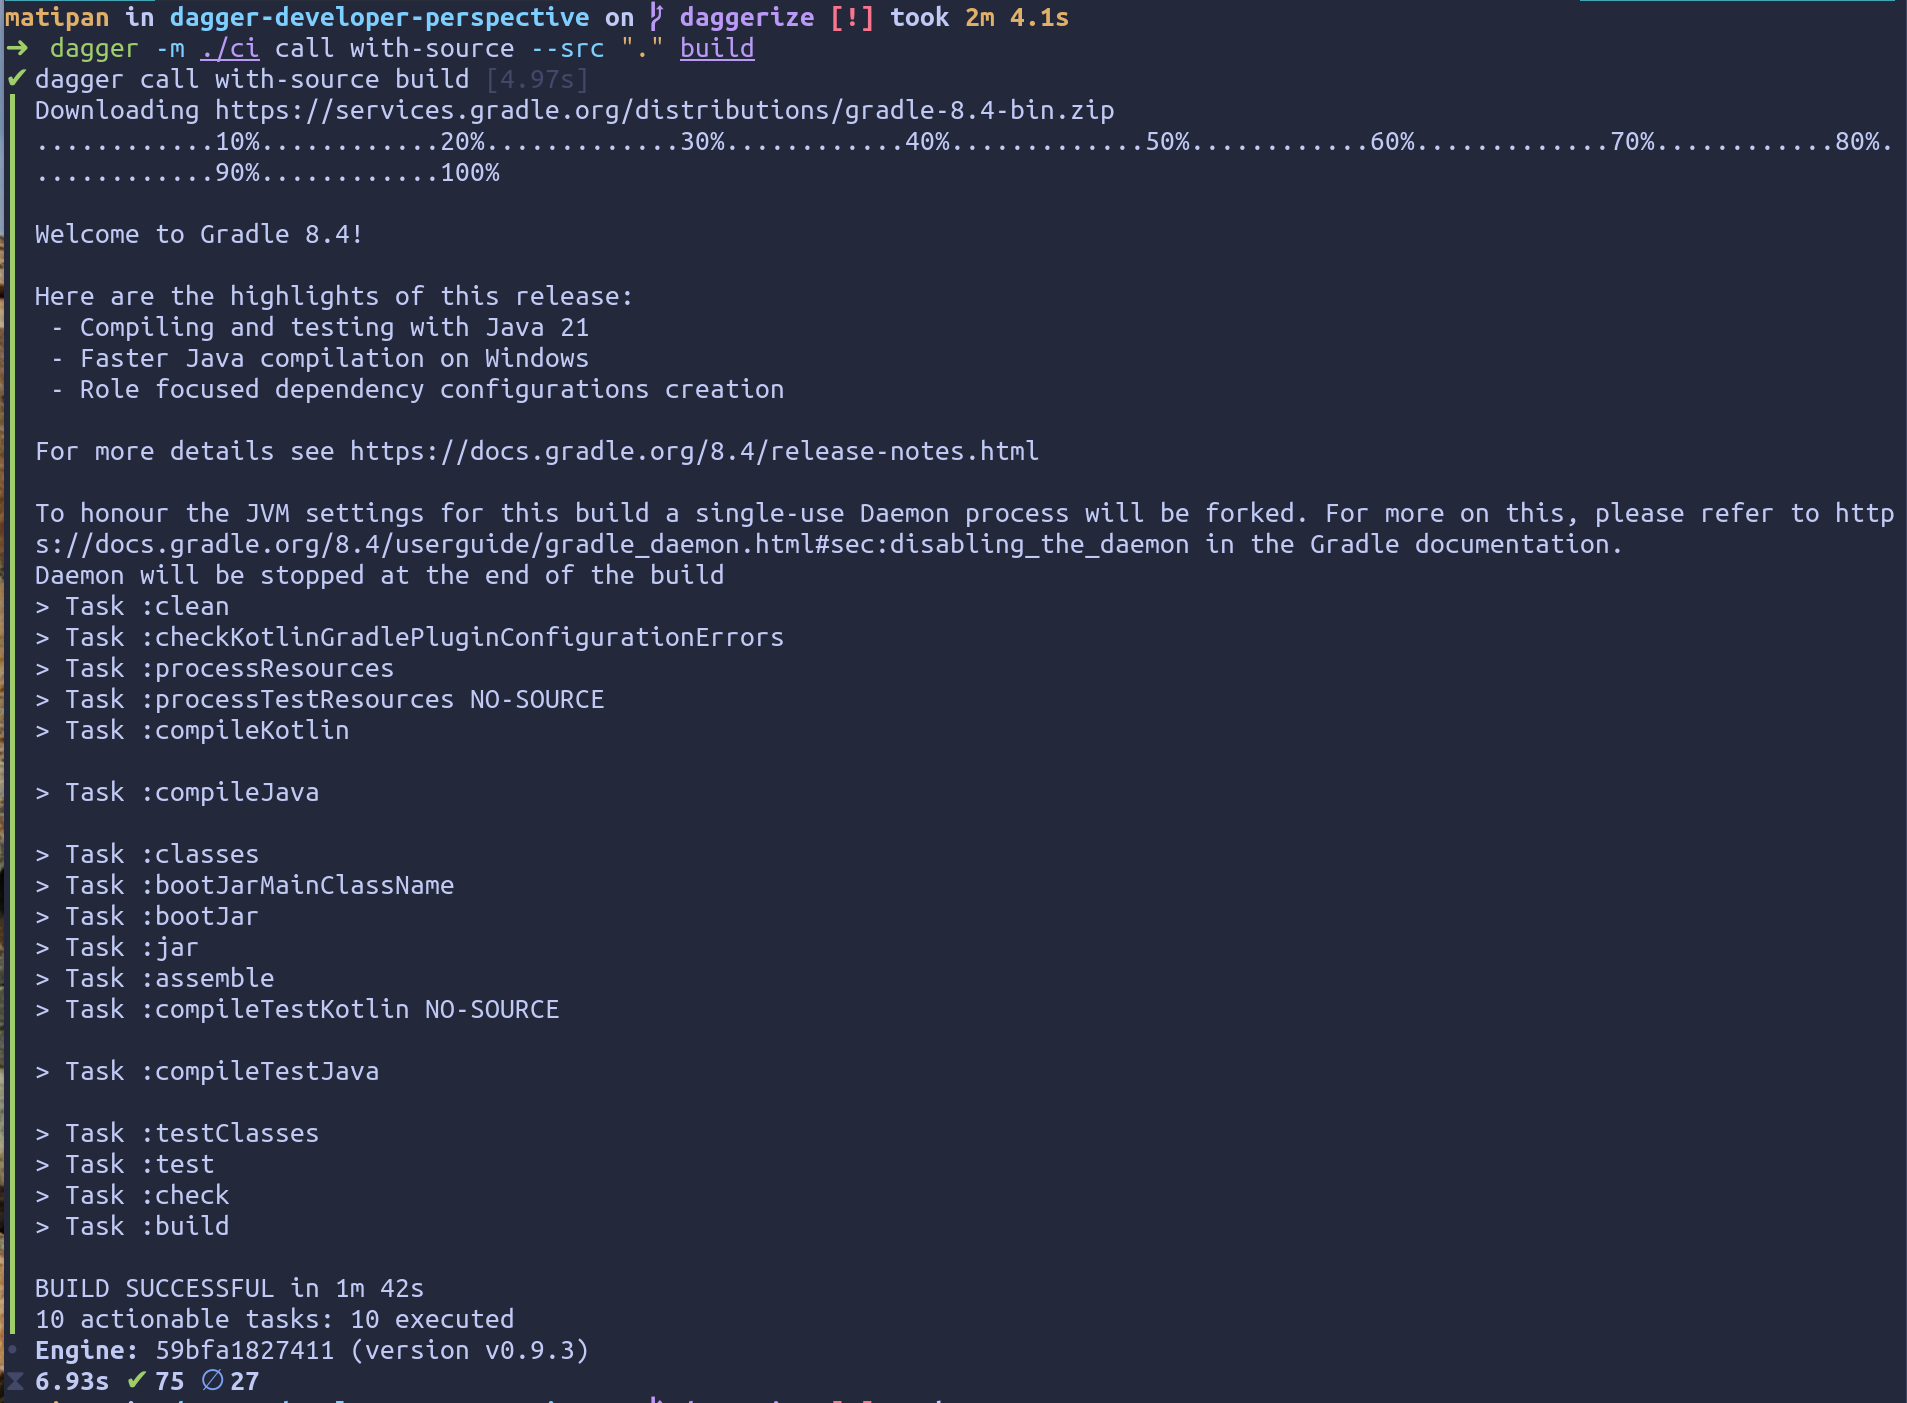 screenshot of the terminal showing the output of the command